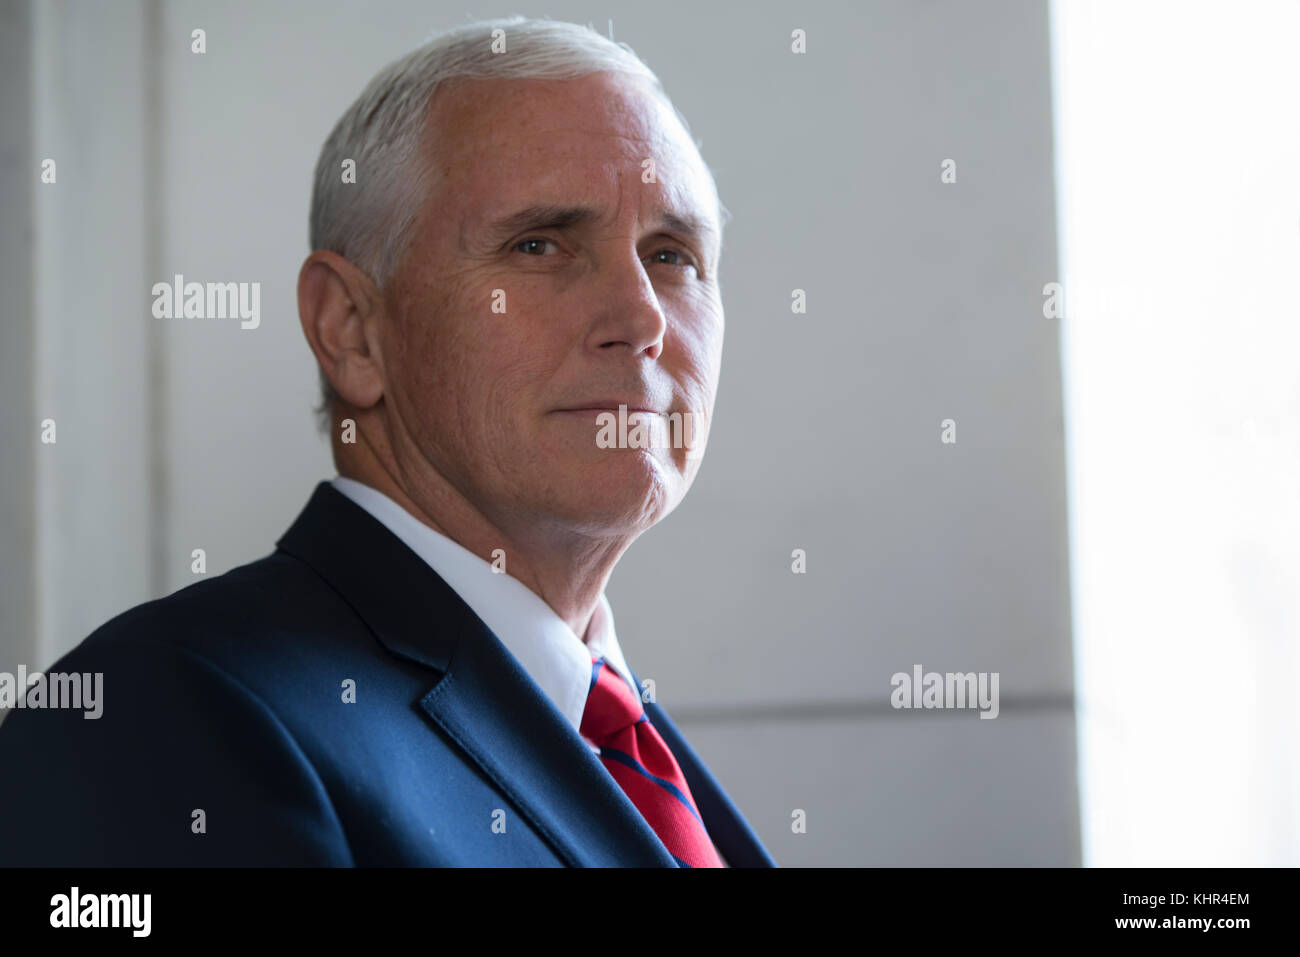 U.S. Vice President Mike Pence attends the 64th Observance of Veterans Day at the Arlington National Cemetery Memorial Amphitheater November 11, 2017 in Arlington, Virginia.  (photo by Elizabeth Frazer via Planetpix) Stock Photo